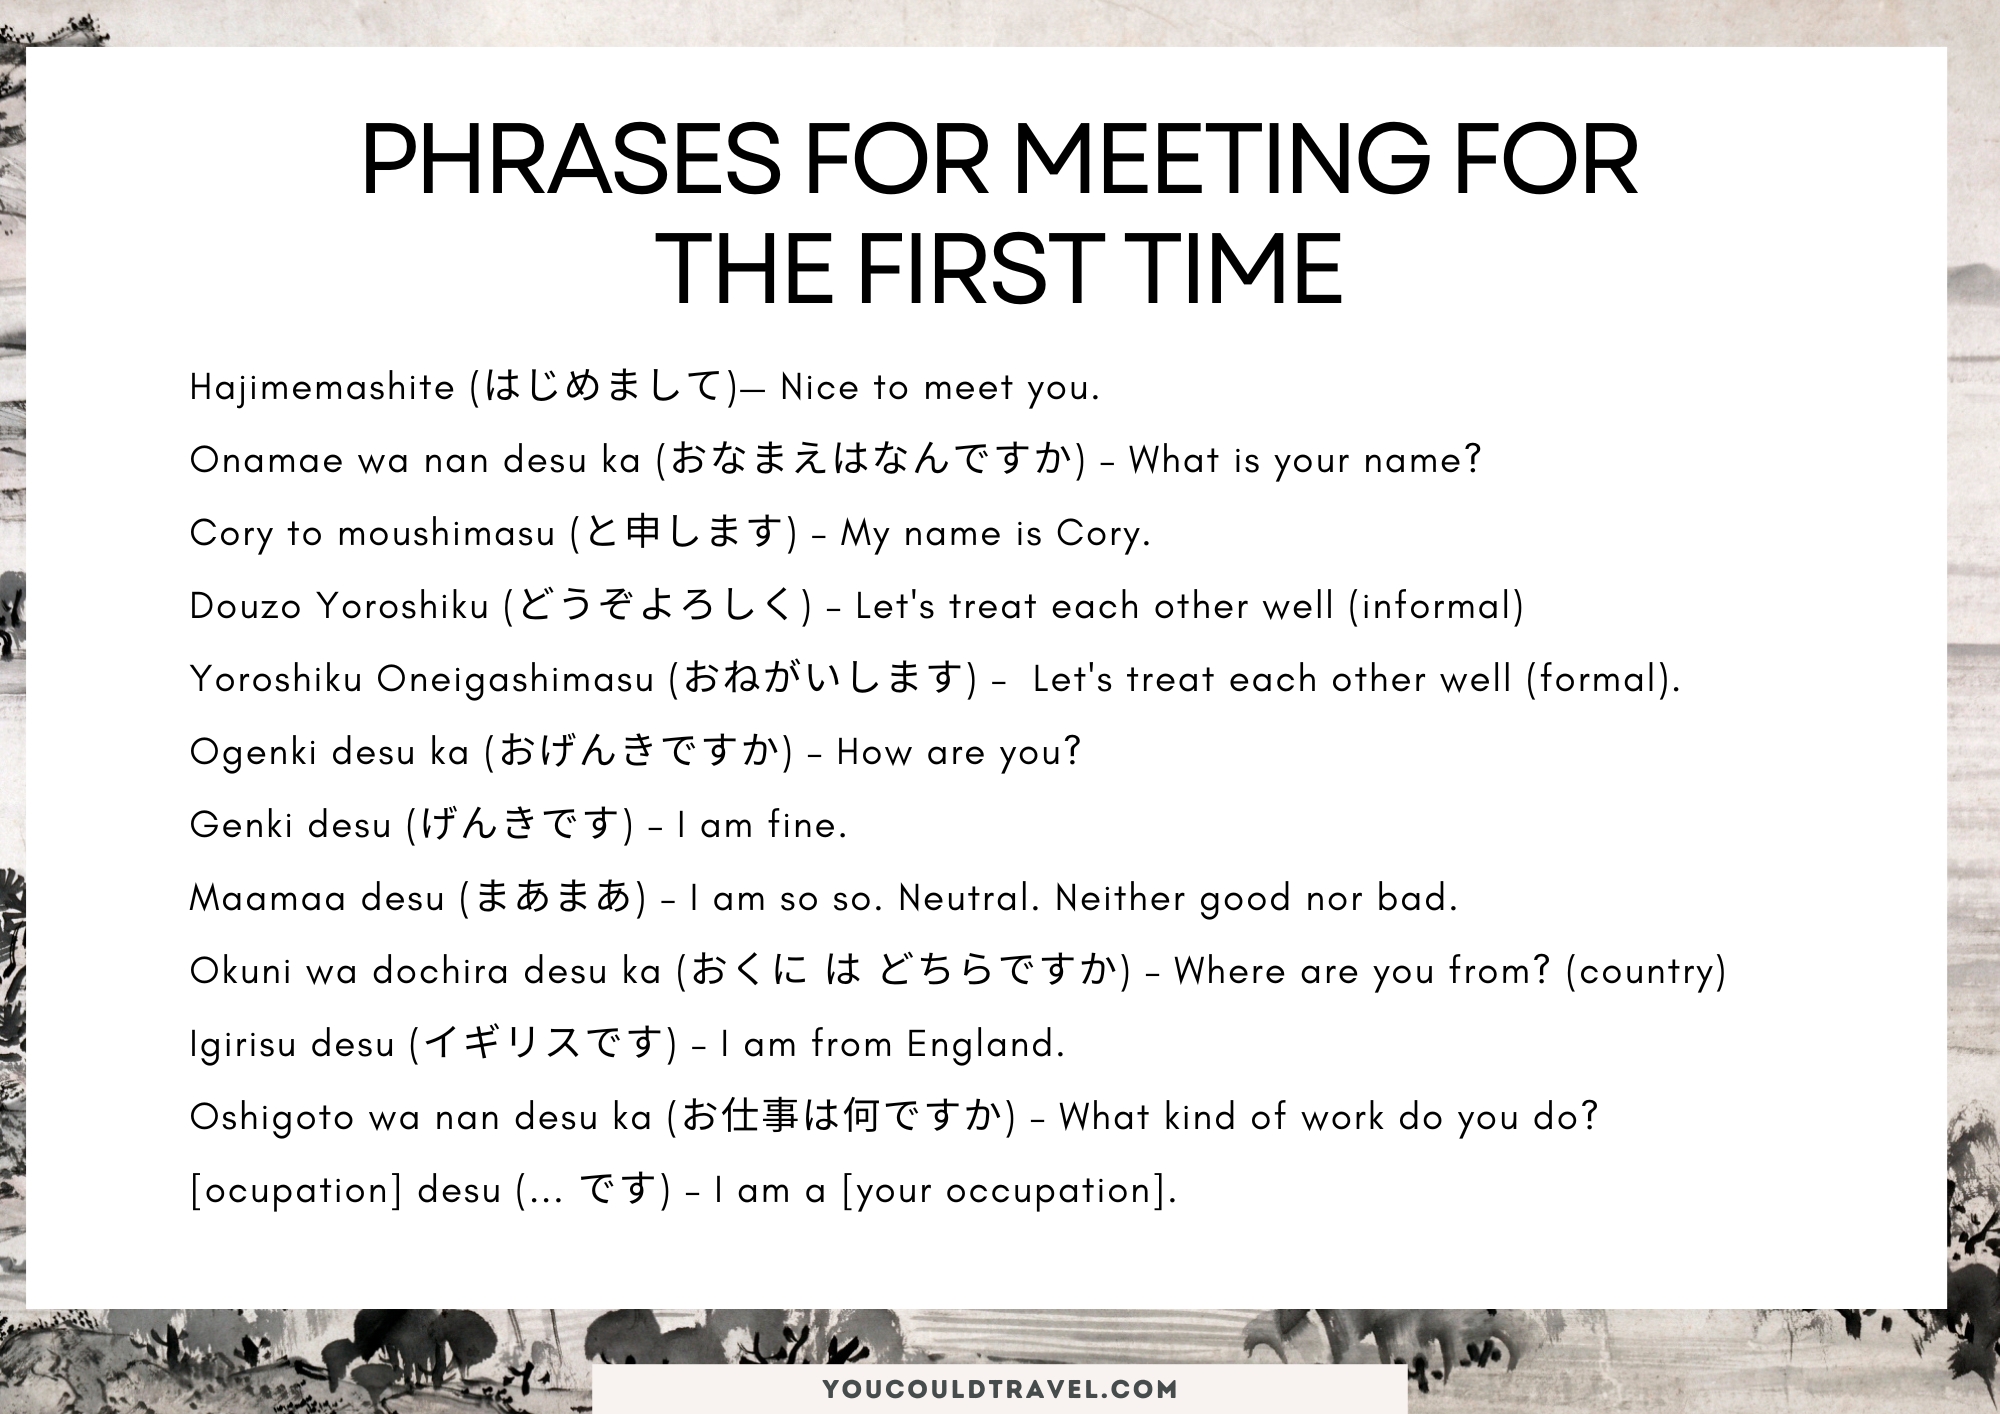 Japanese phrases for meeting for the first time